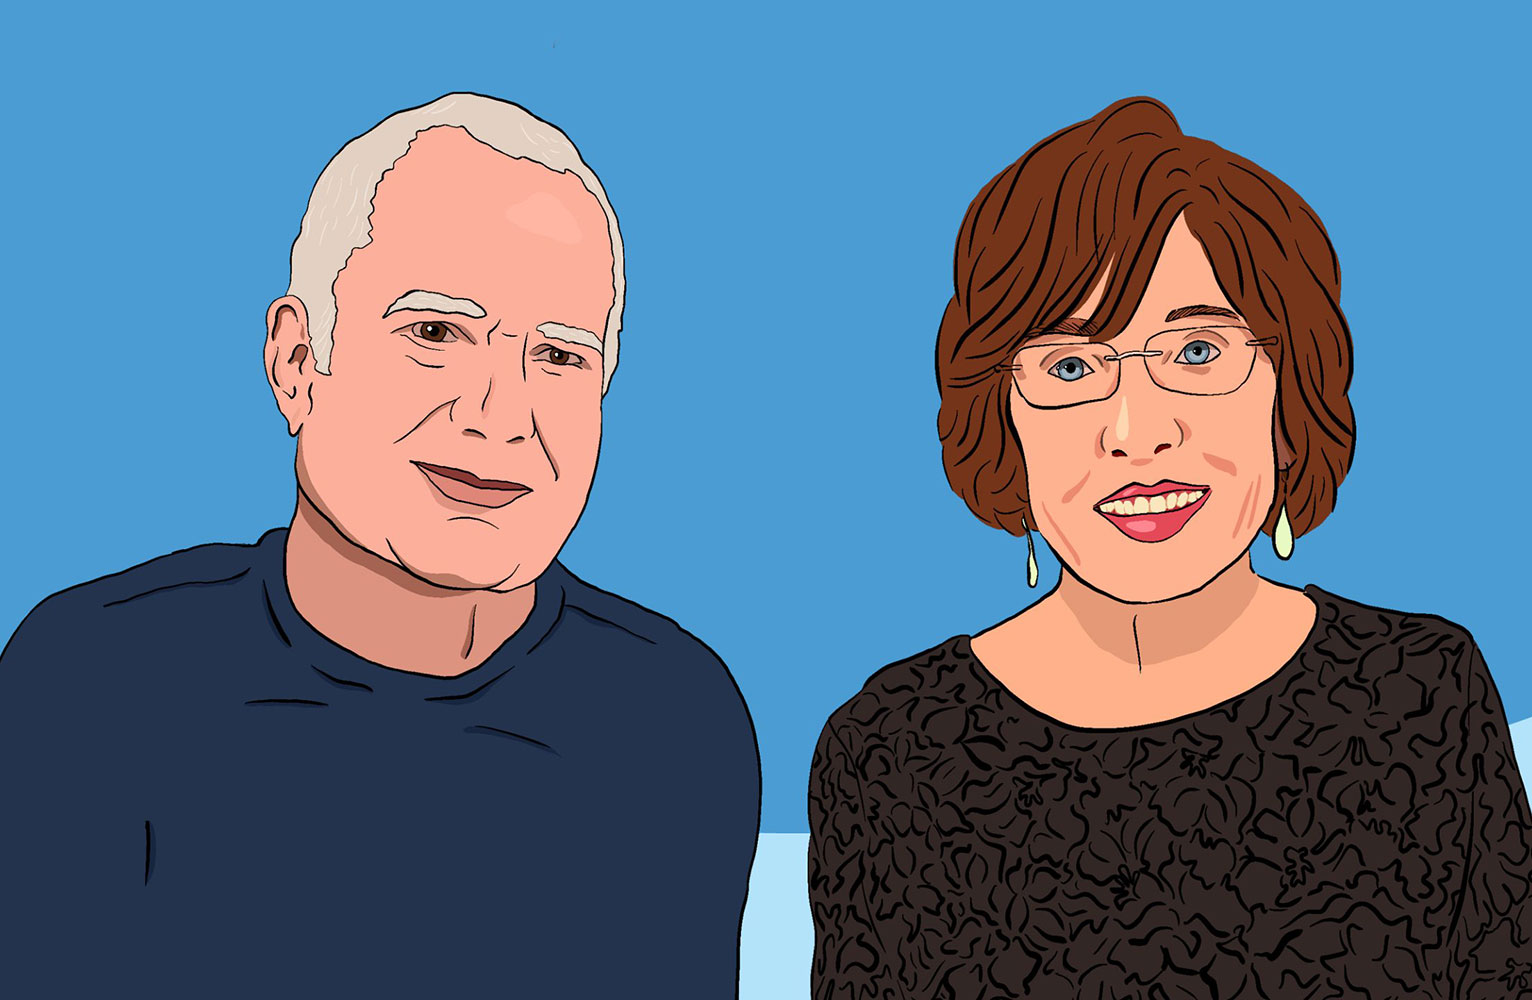 Illustration of John Powell and Jacquelyn Dowd Hall from the shoulders up